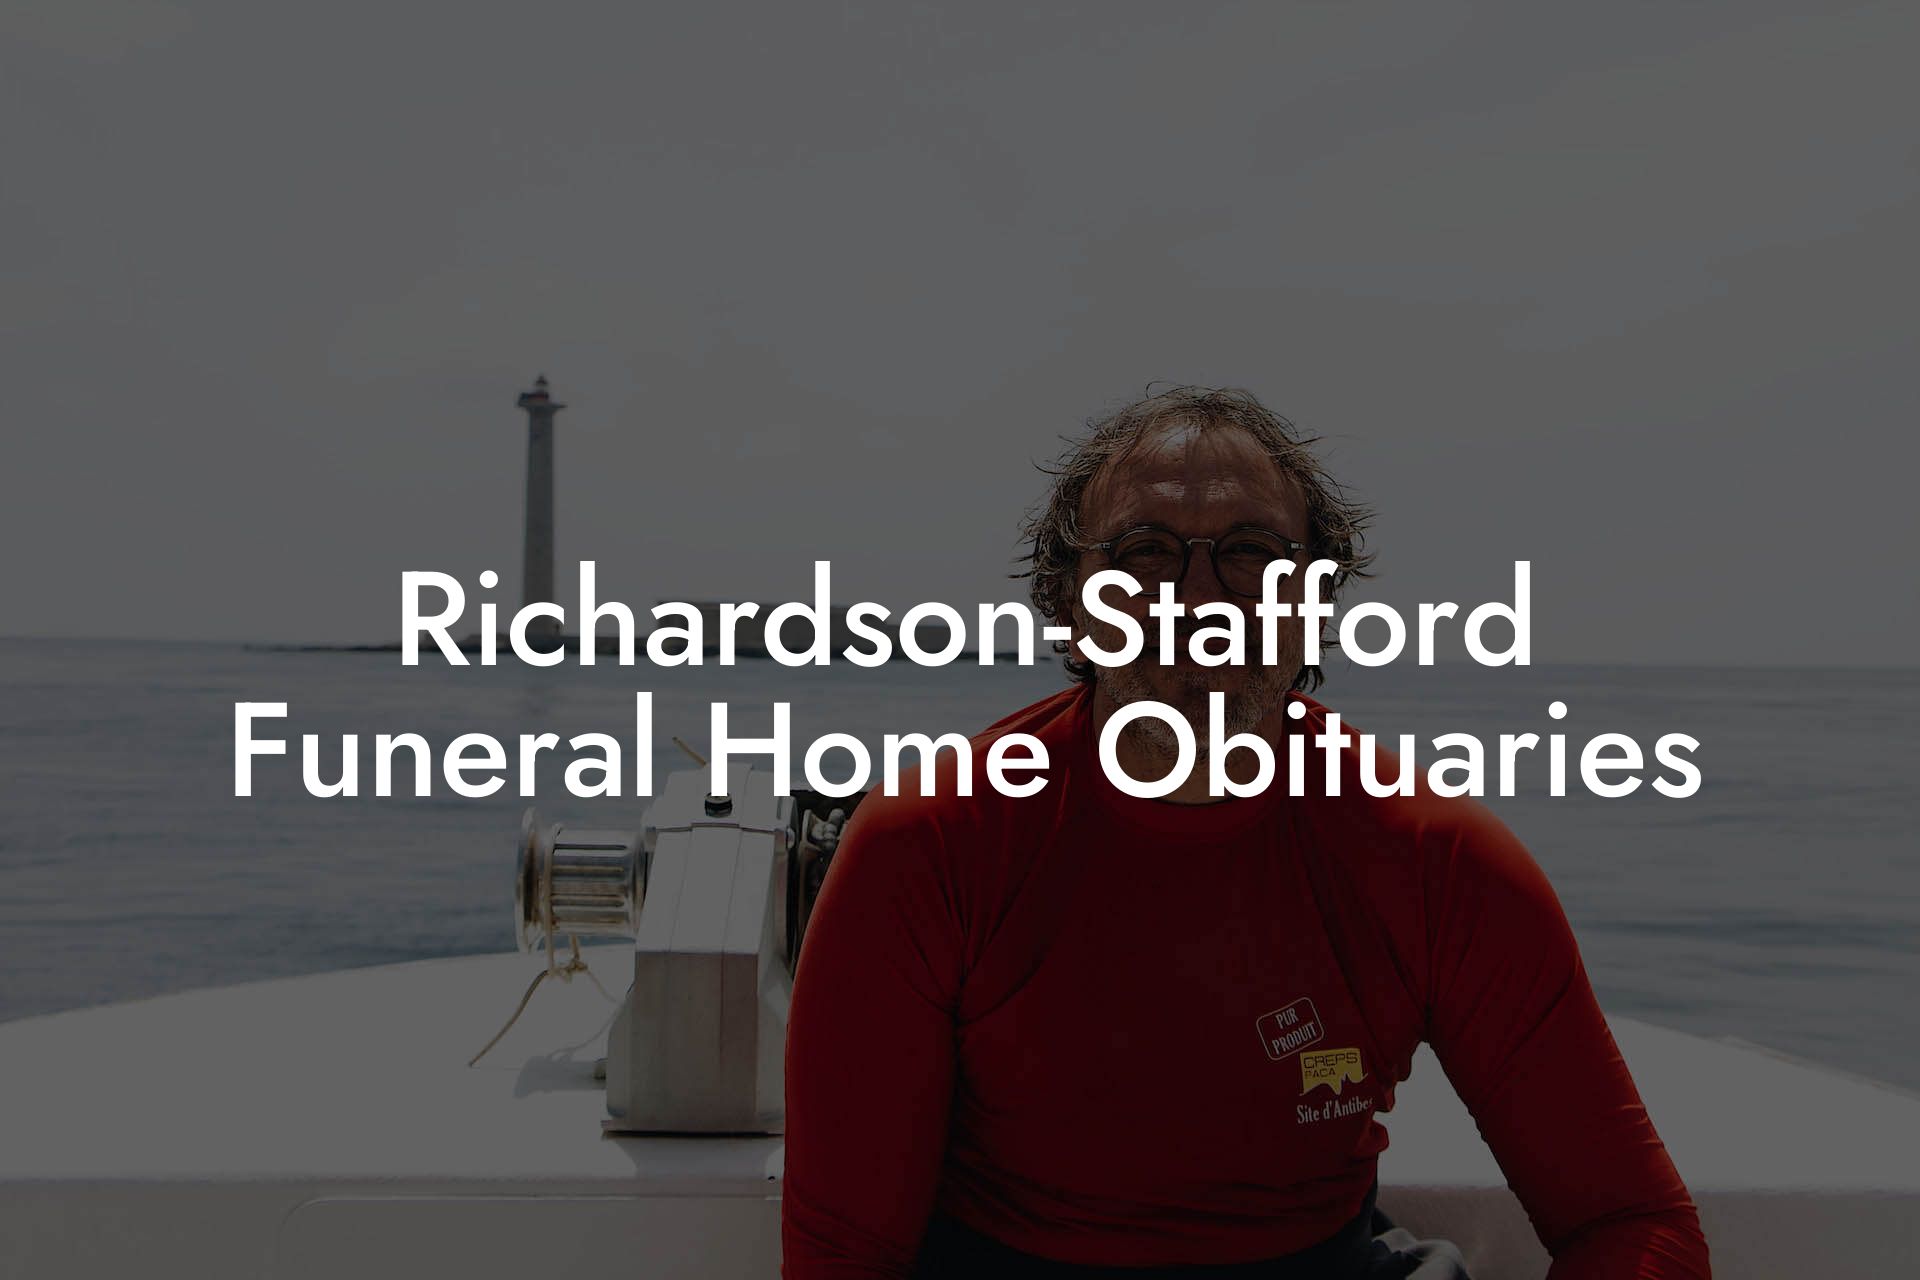 Richardson-Stafford Funeral Home Obituaries